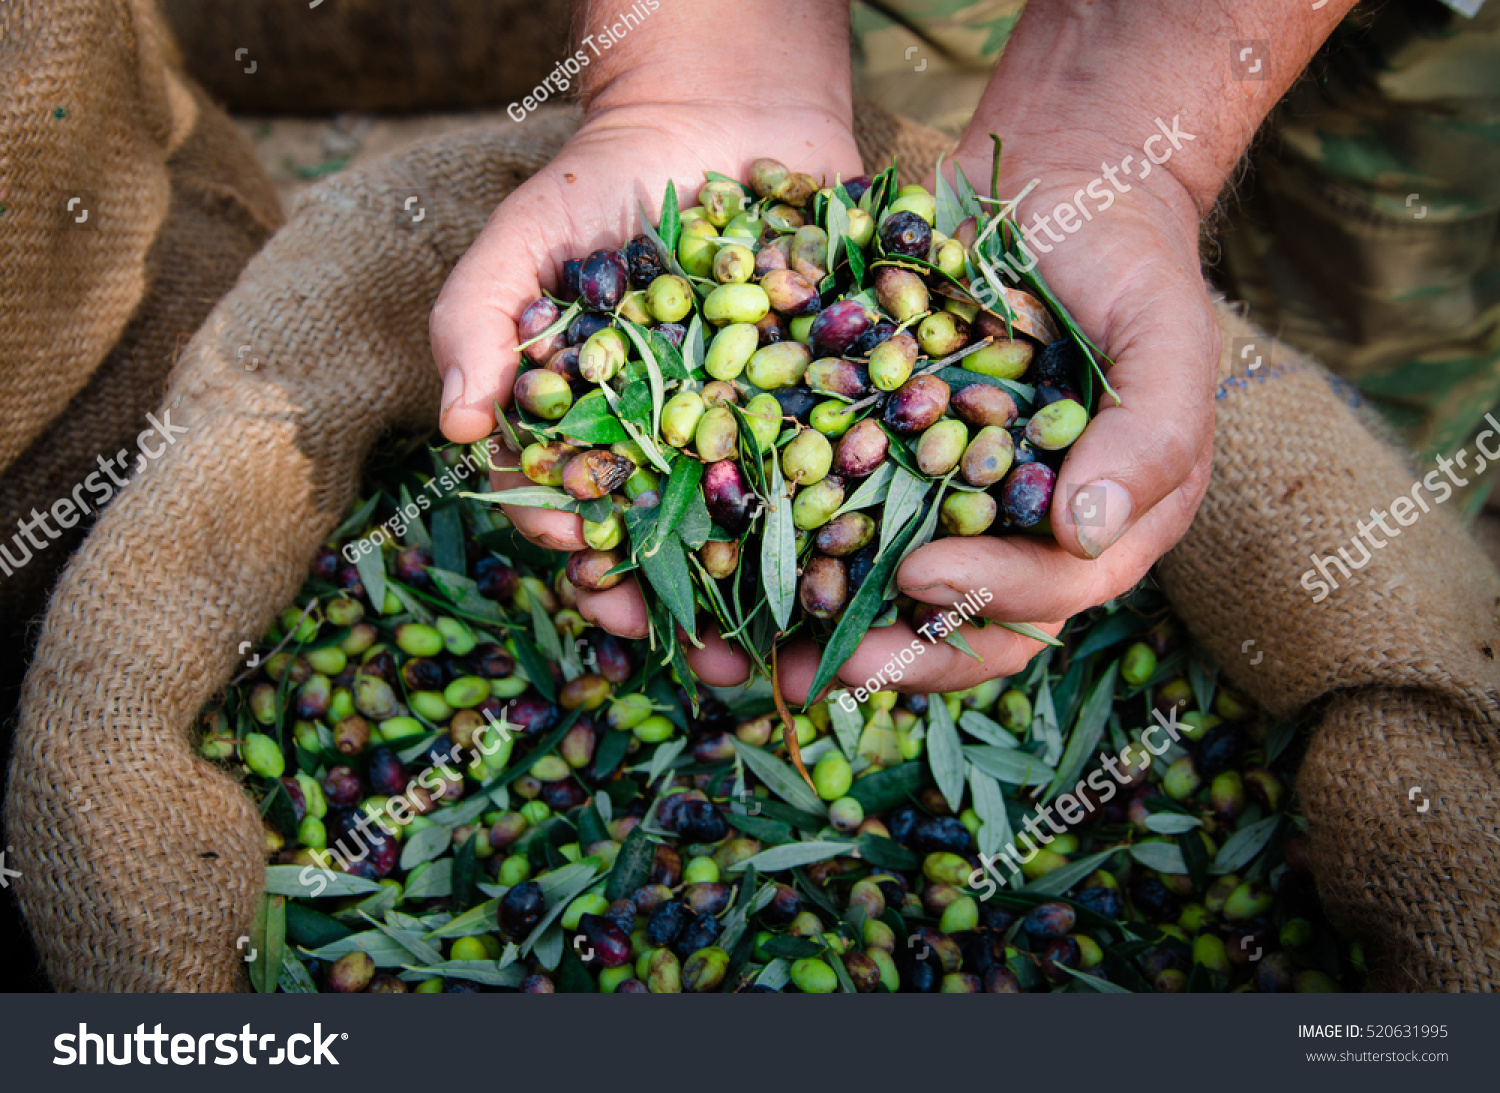 Harvested fresh olives in the hands of farmer, Crete, Greece. #520631995